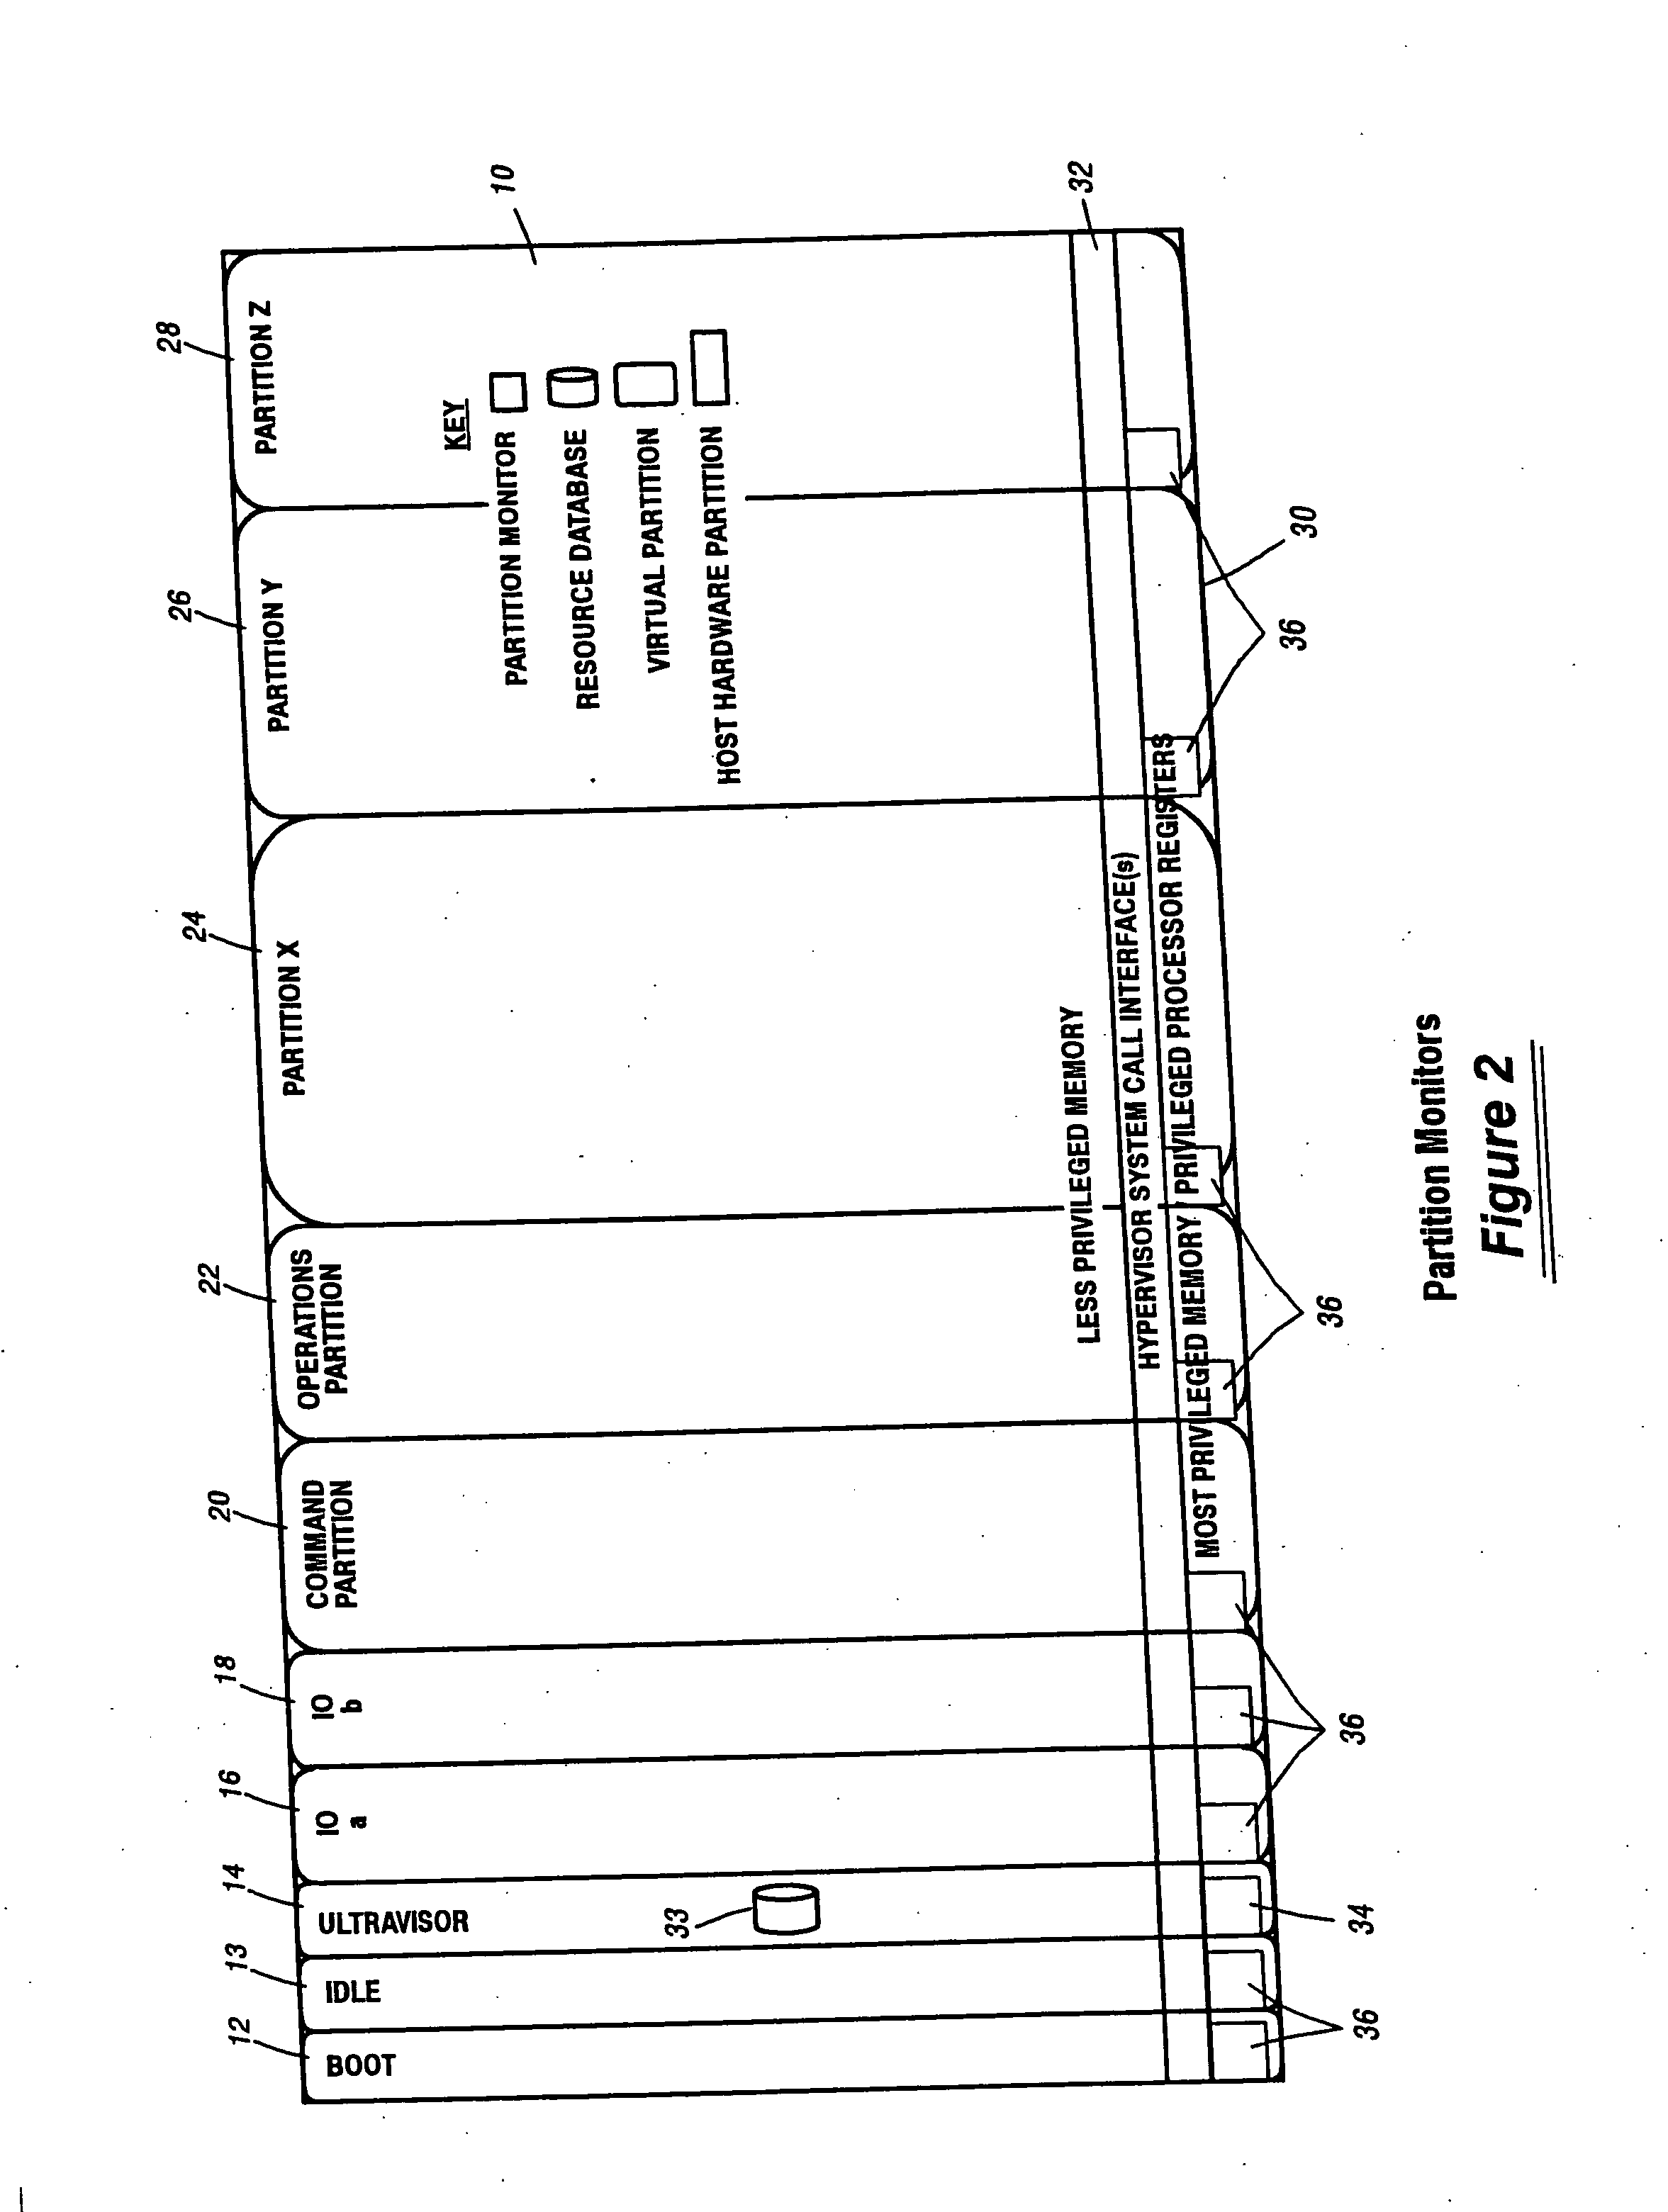 Scalable partition memory mapping system